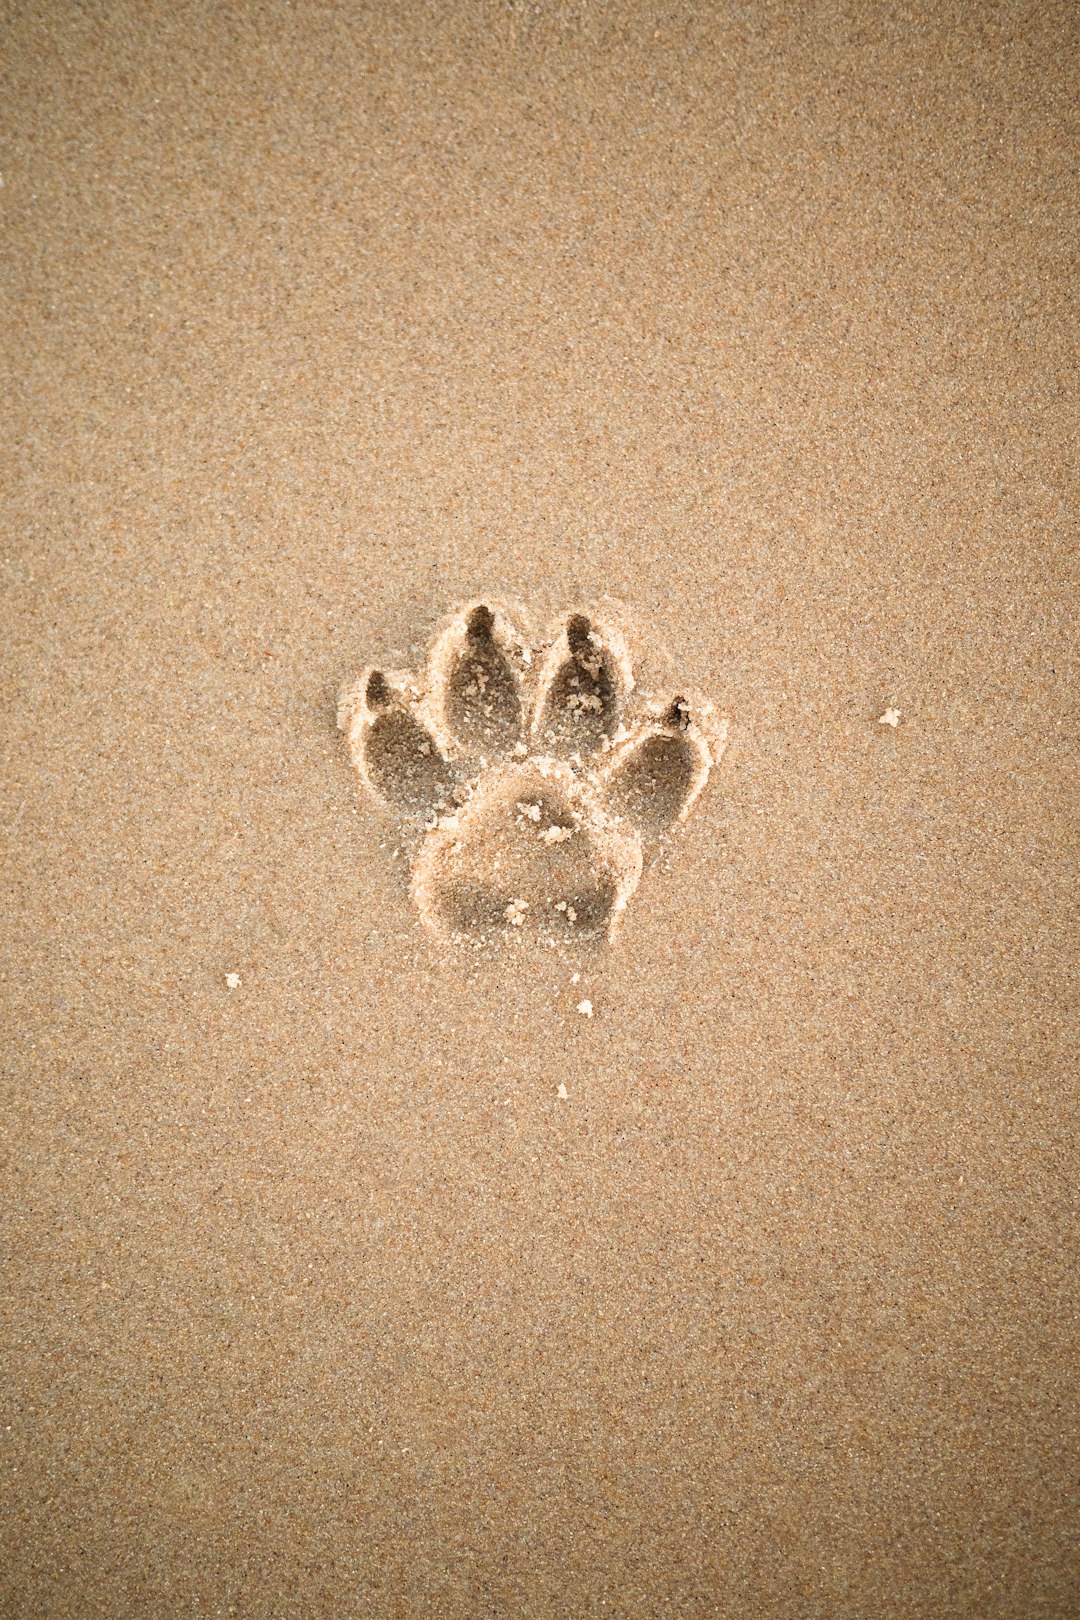 brown sand with heart shaped sand